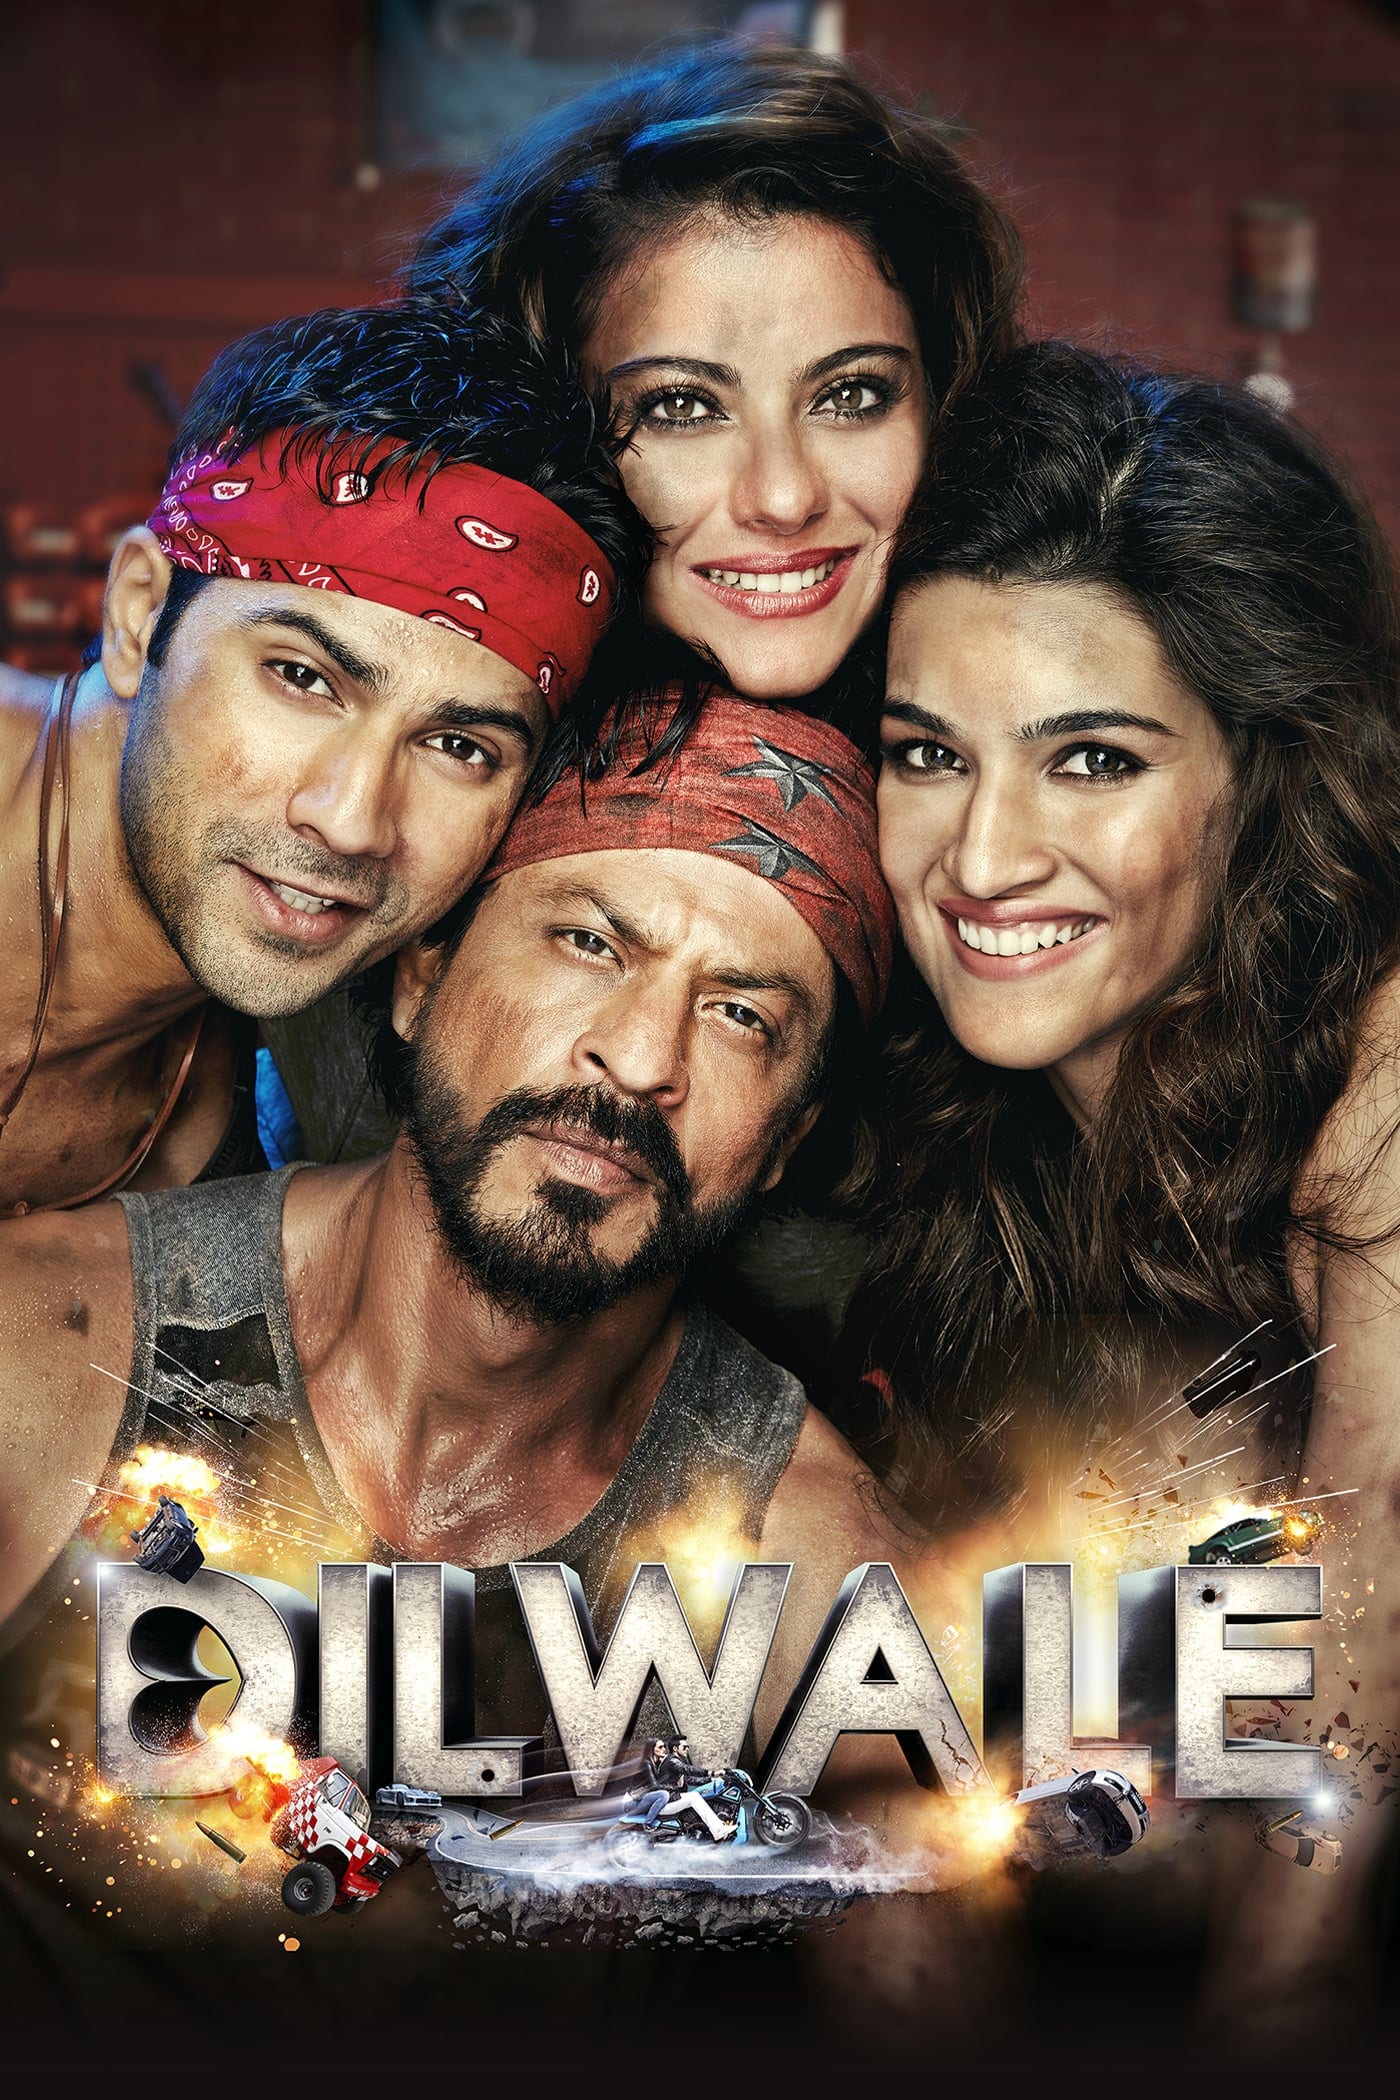 Poster for the movie "Dilwale"